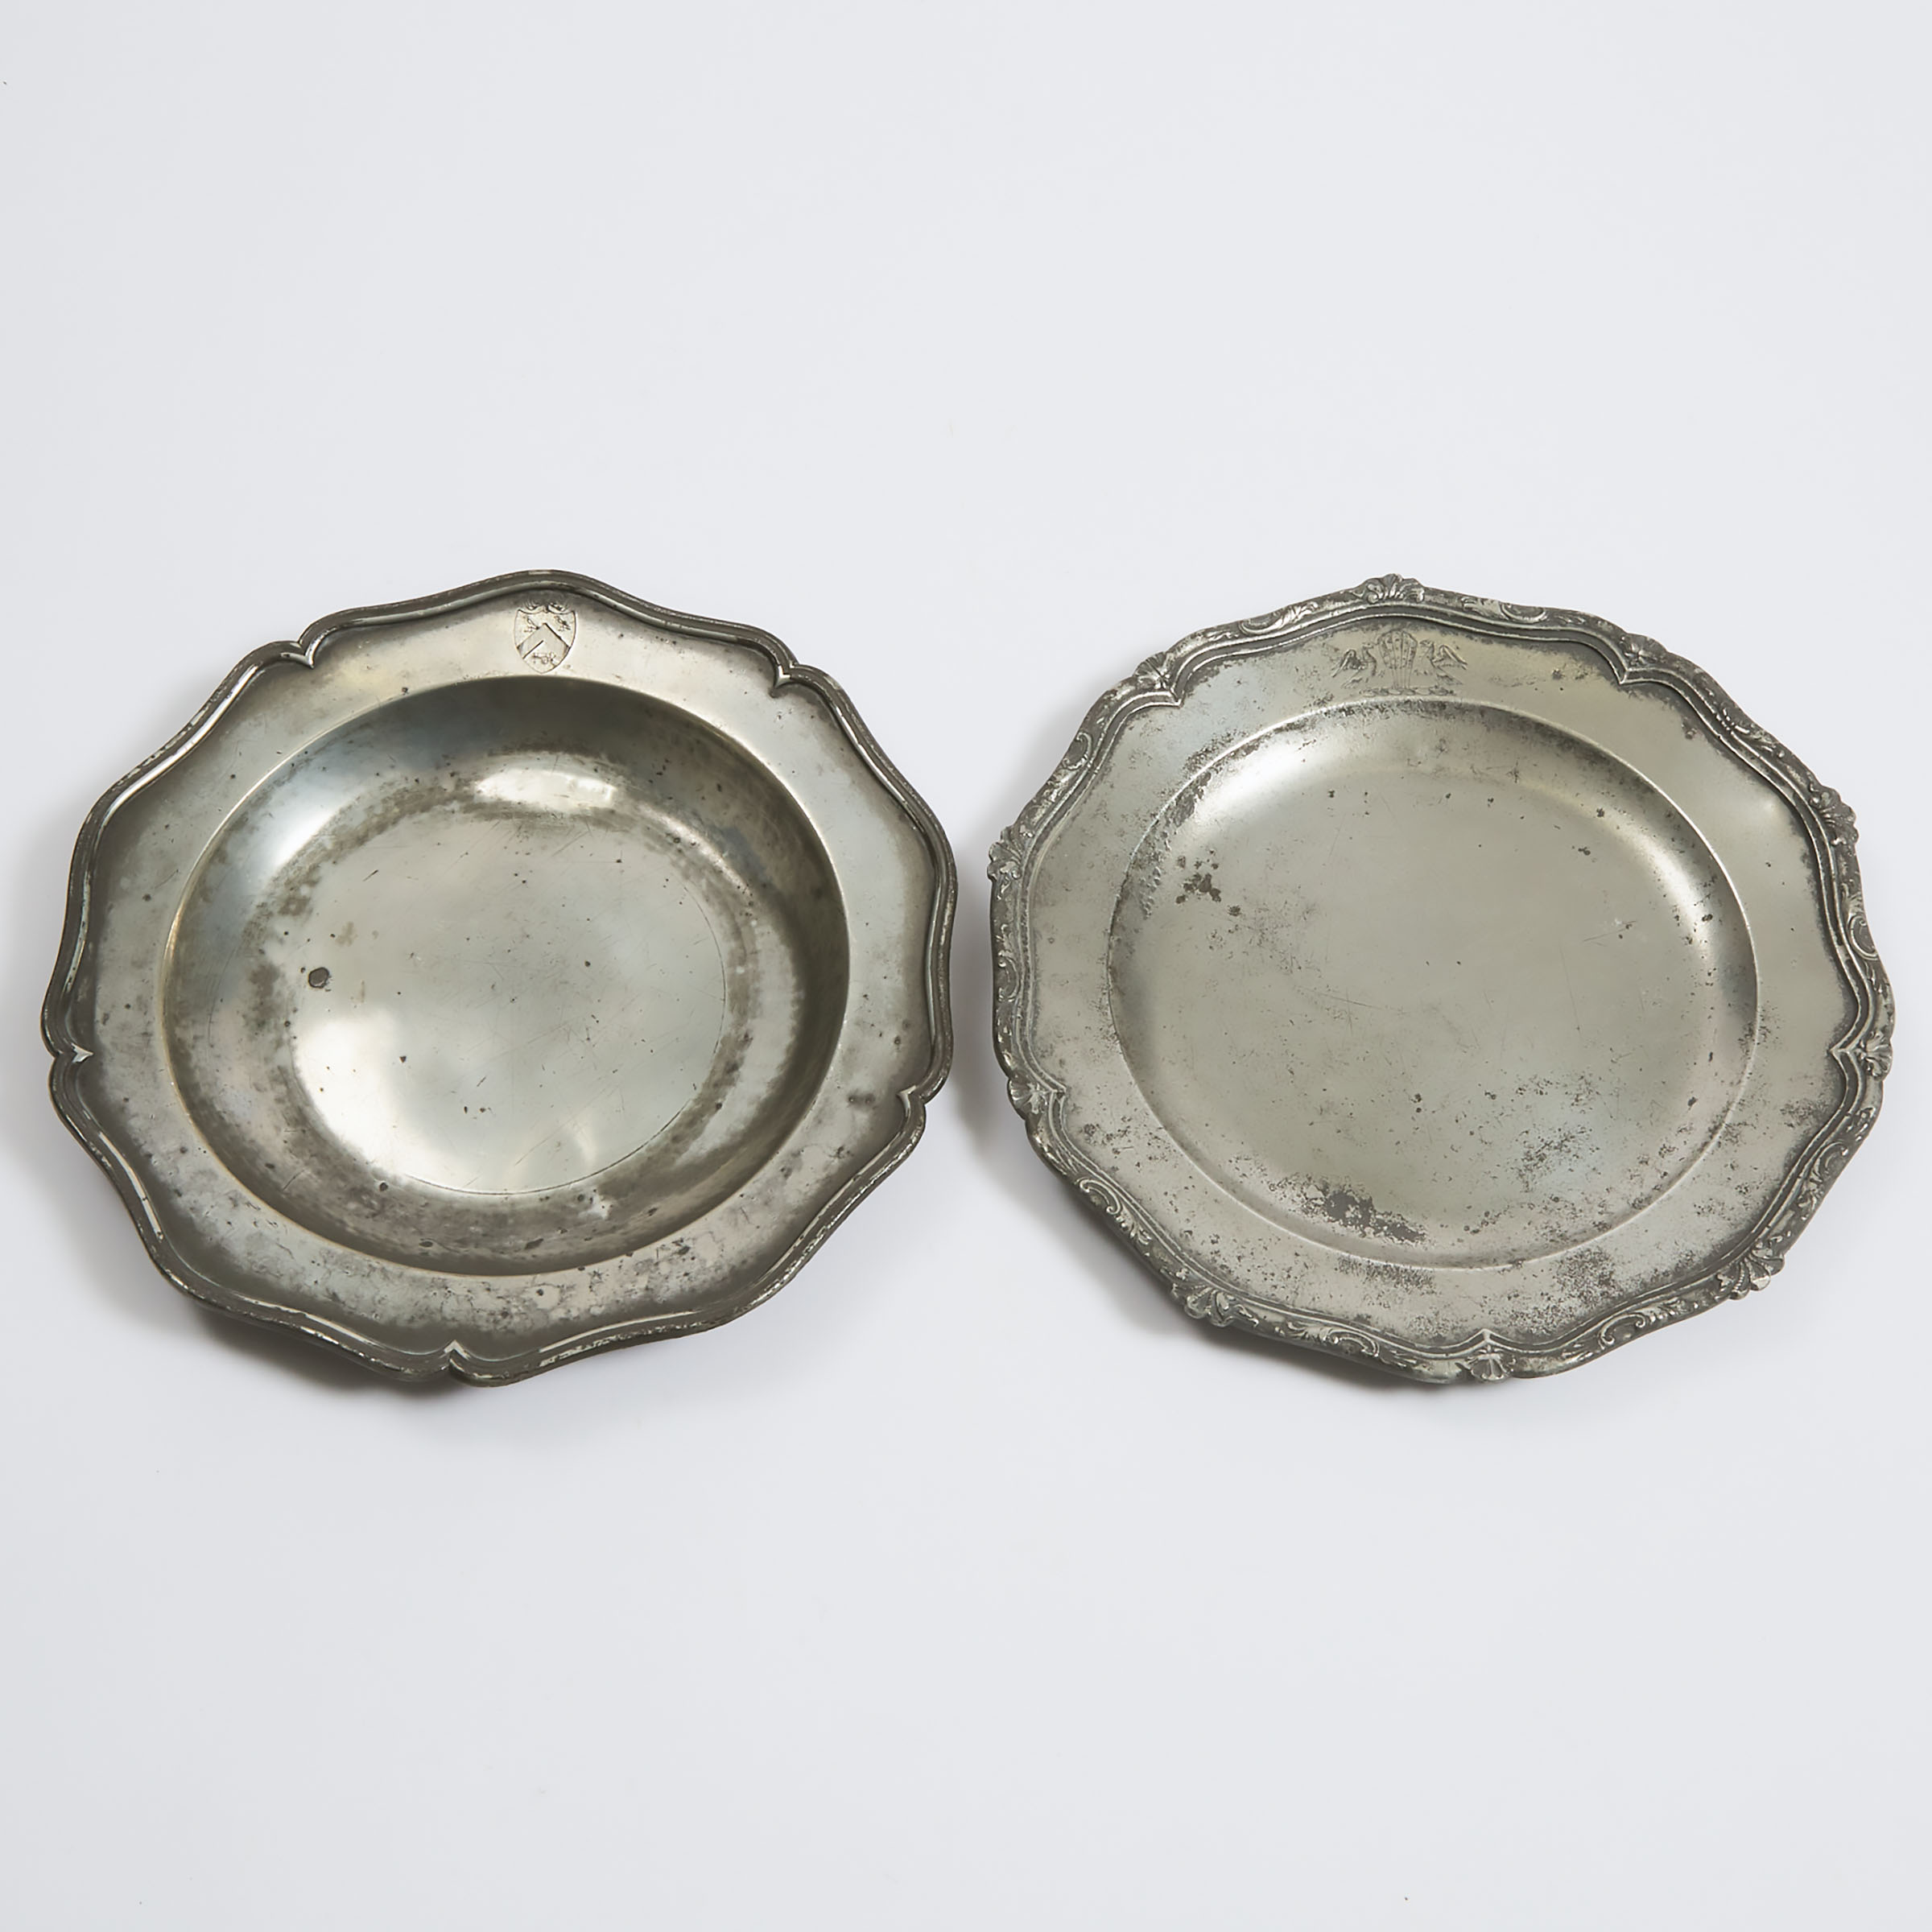 Two Englsih Pewter Wavy Edge Plates, London, early-mid 18th century